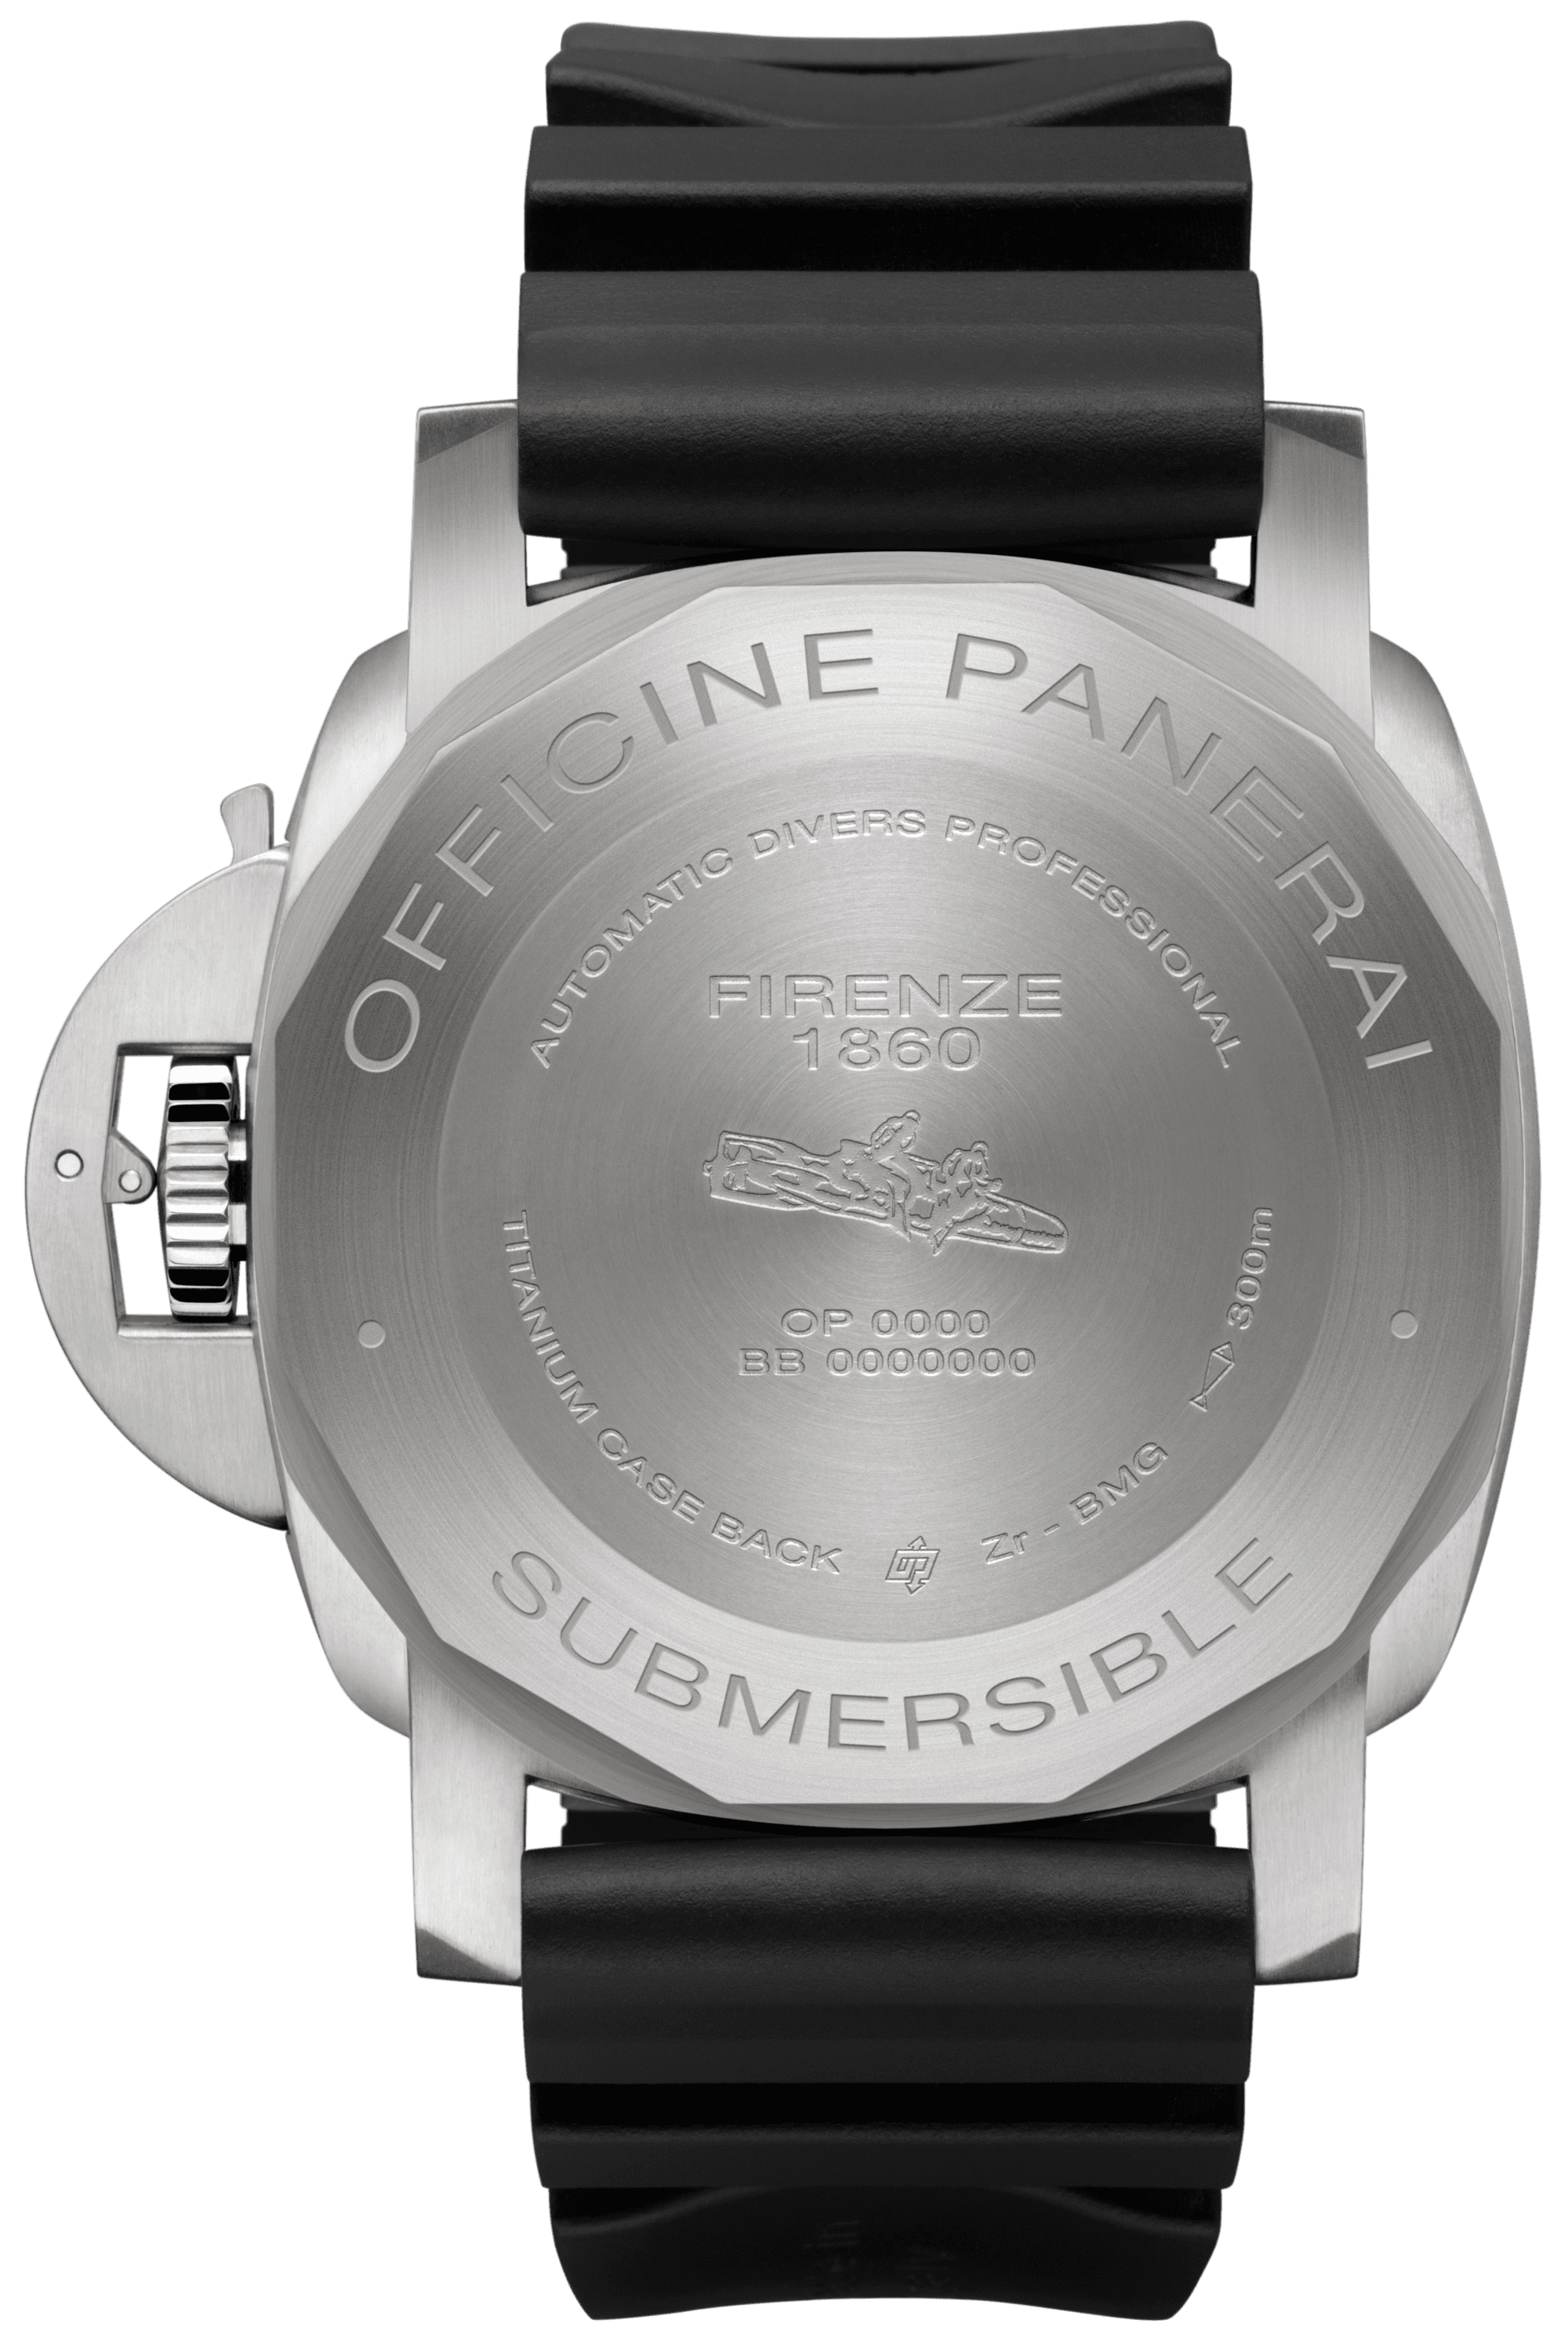 Submersible BMG-TECH™ - 47mm SUBMERSIBLE Référence :  PAM02692 -2